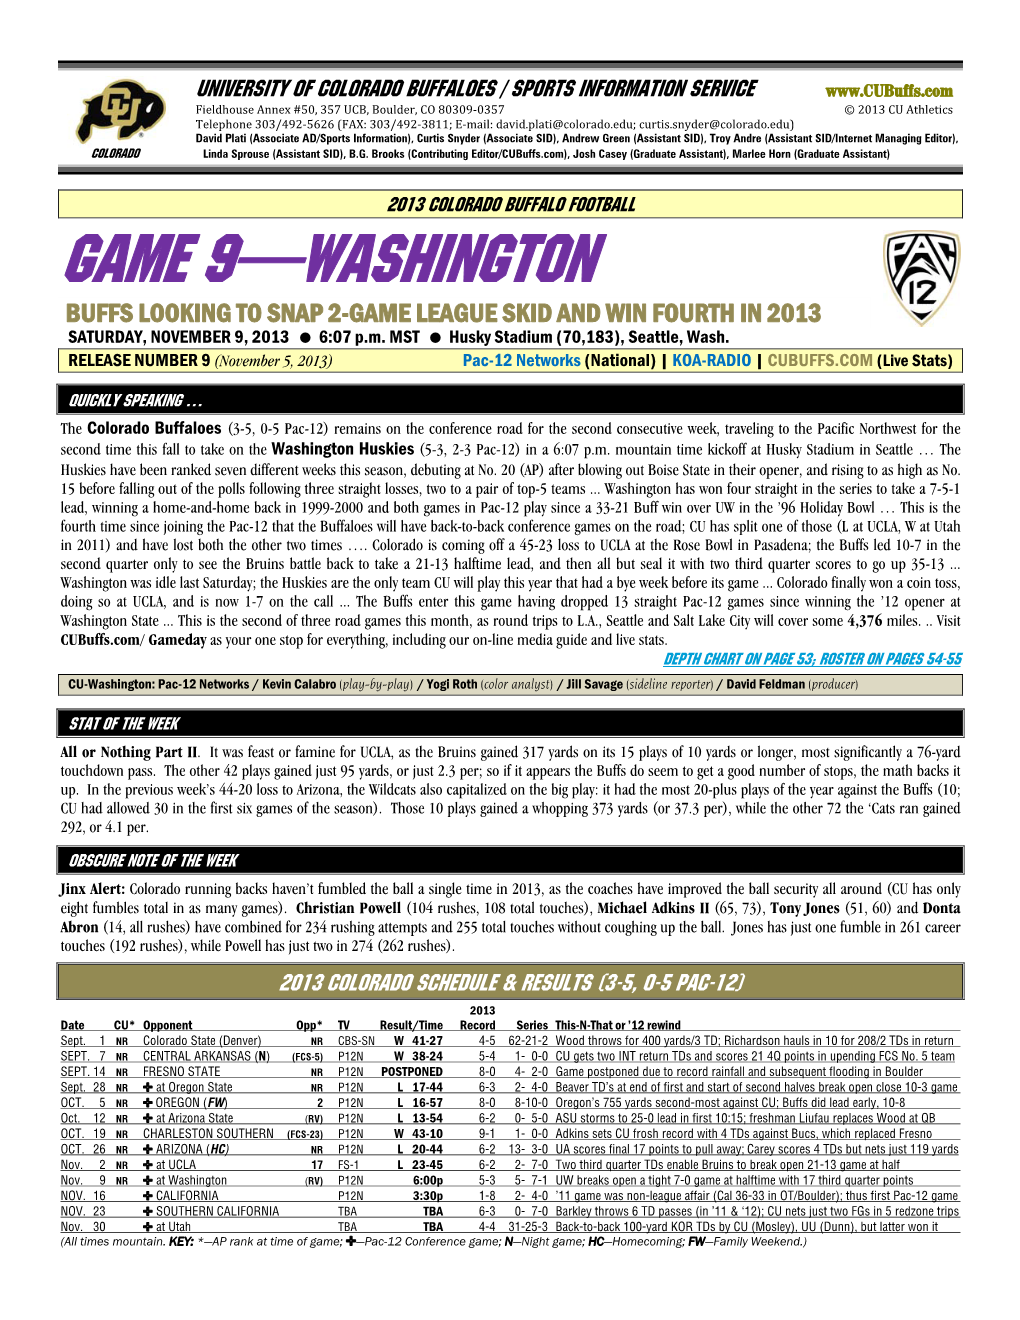 GAME 9—WASHINGTON BUFFS LOOKING to SNAP 2-GAME LEAGUE SKID and WIN FOURTH in 2013 SATURDAY, NOVEMBER 9, 2013 6:07 P.M